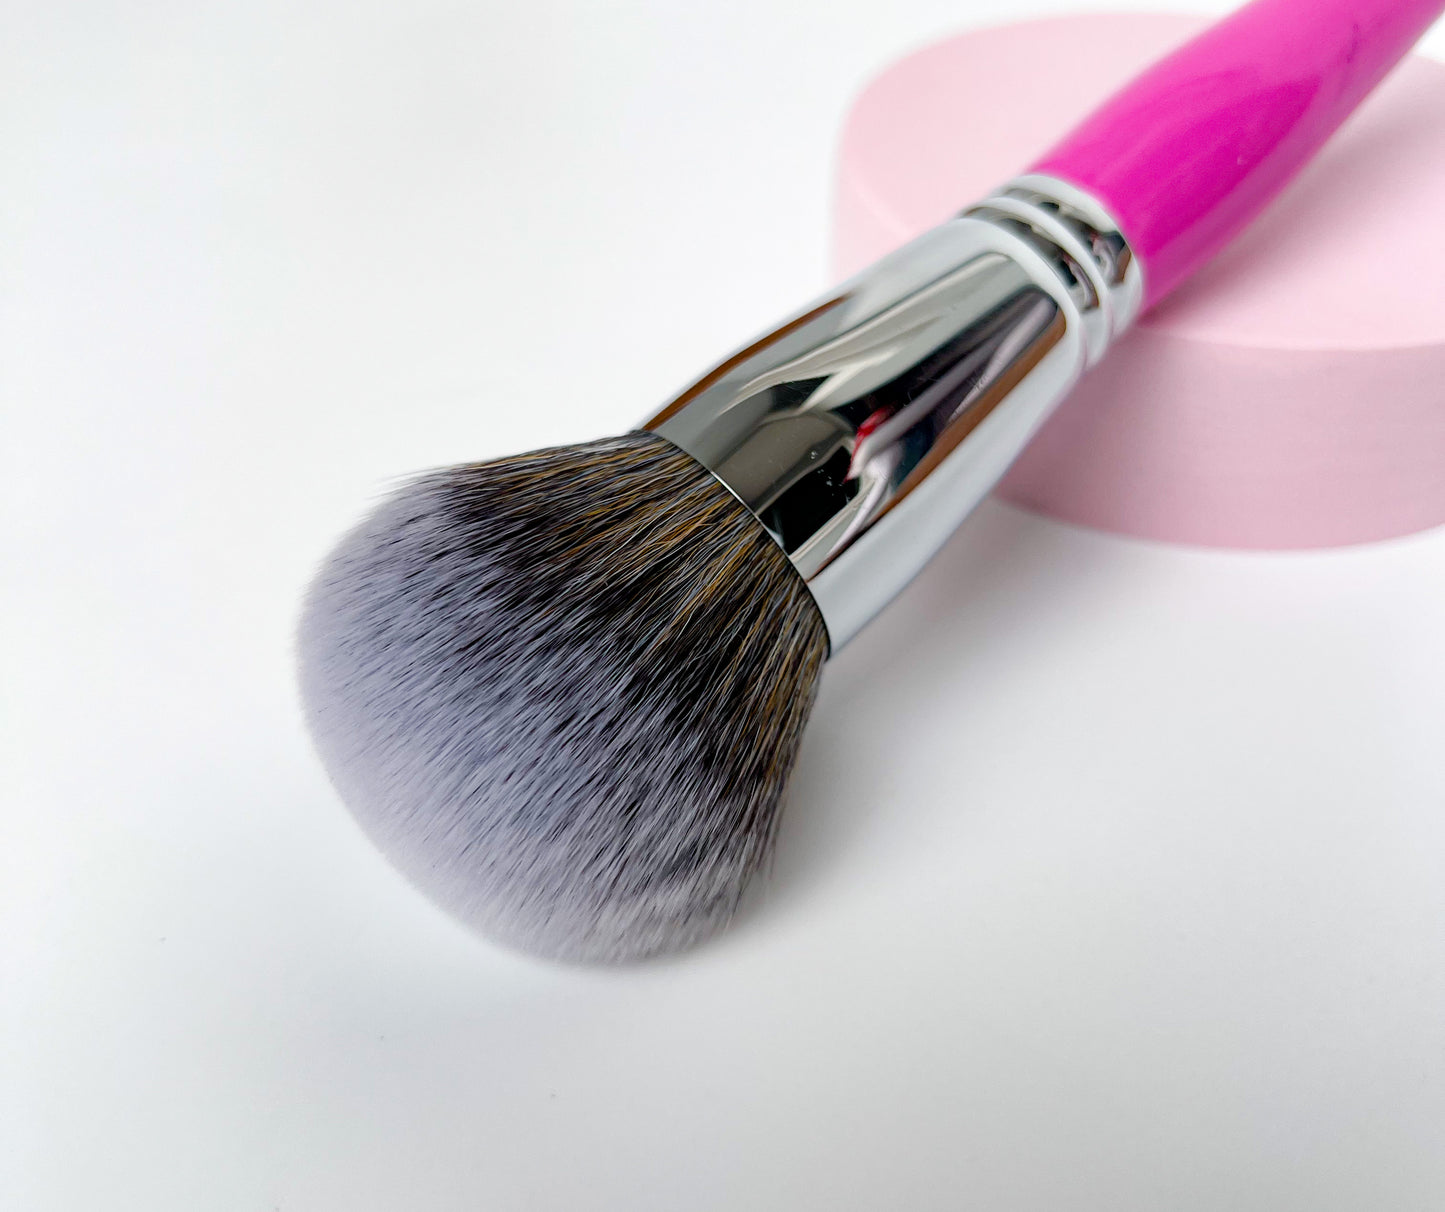 luxe nk39 luxe powder brush